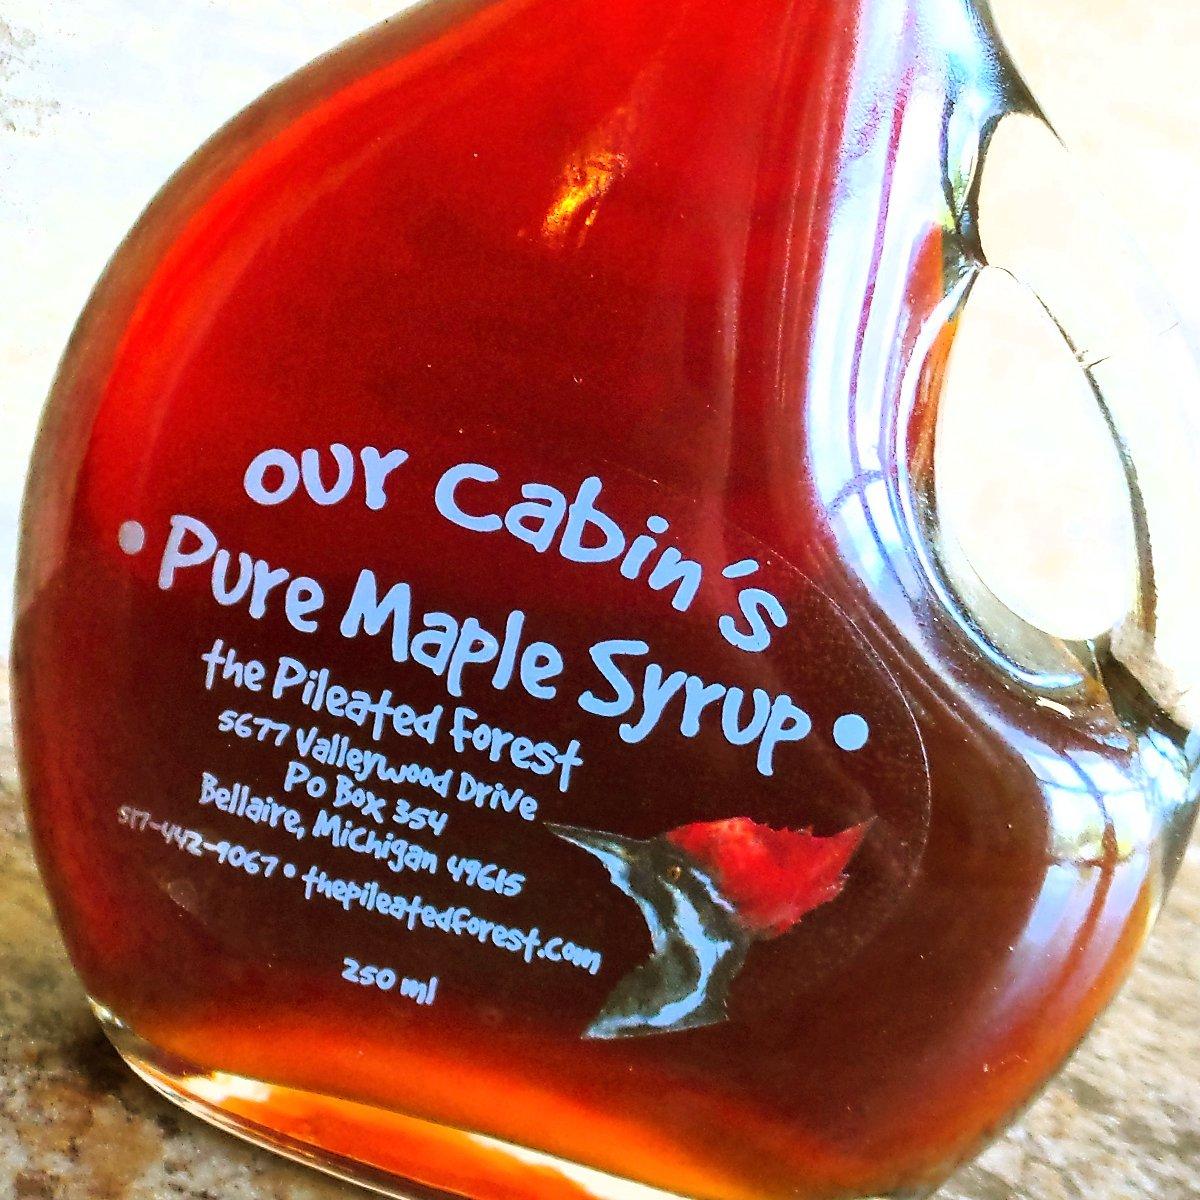 Use a high quality, real maple syrup in the glaze for maximum flavor.